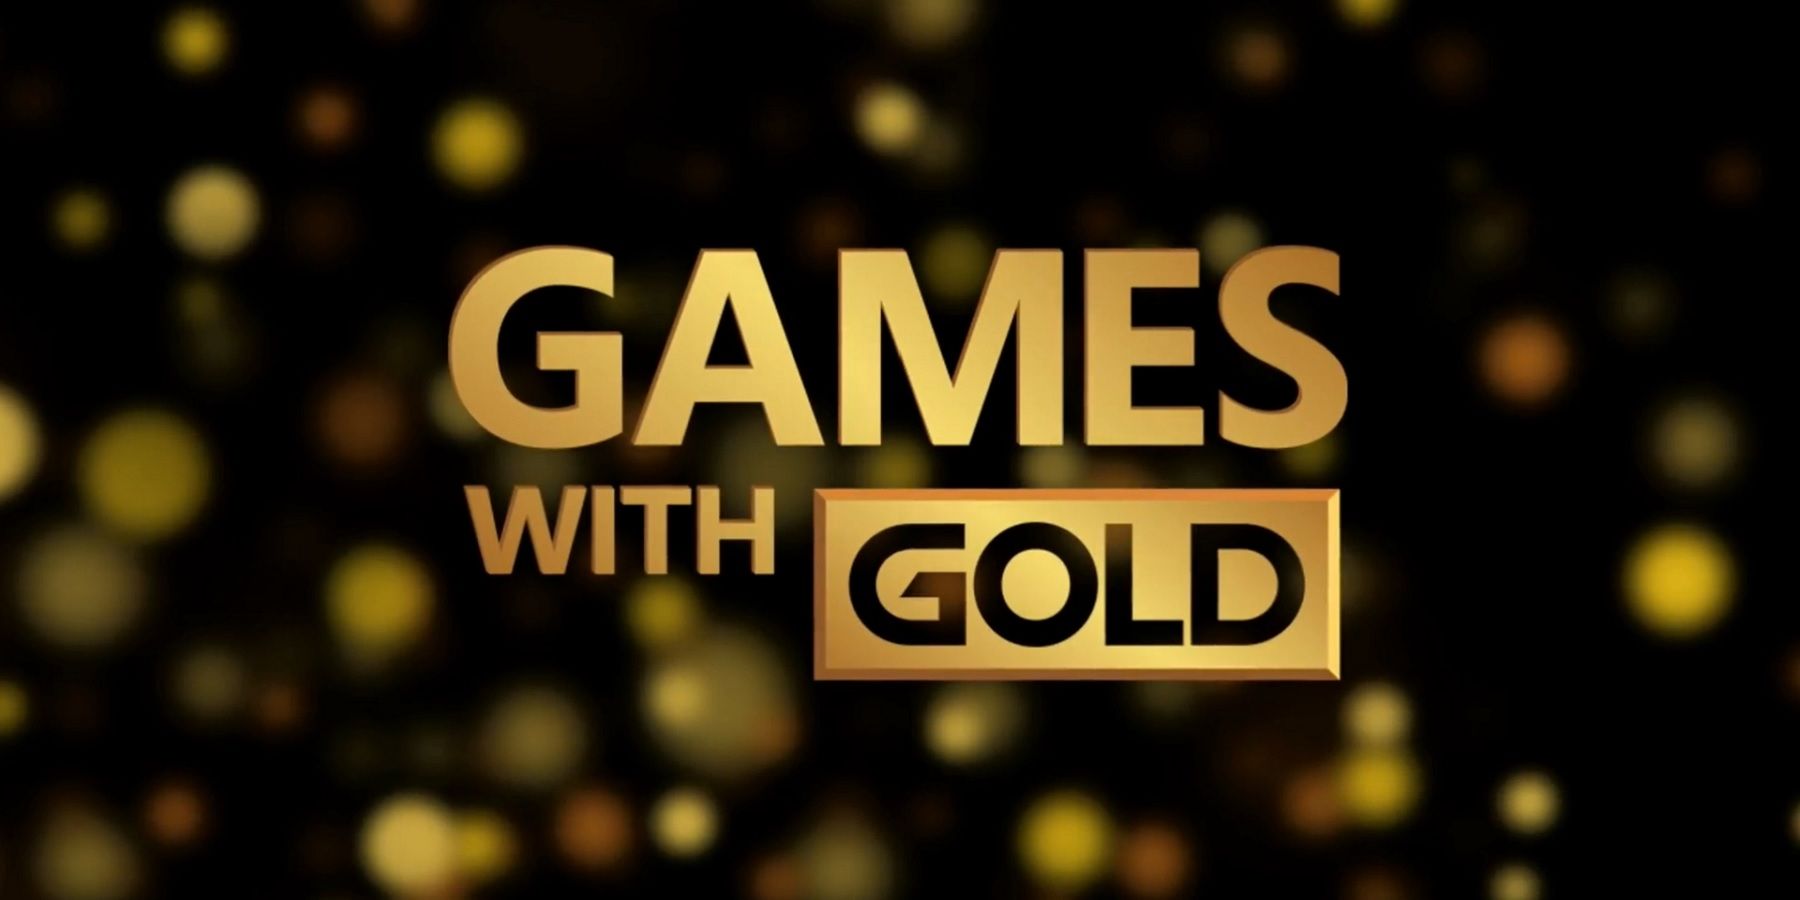 Games with Gold February 2022 includes FREE Xbox Series X download, Gaming, Entertainment